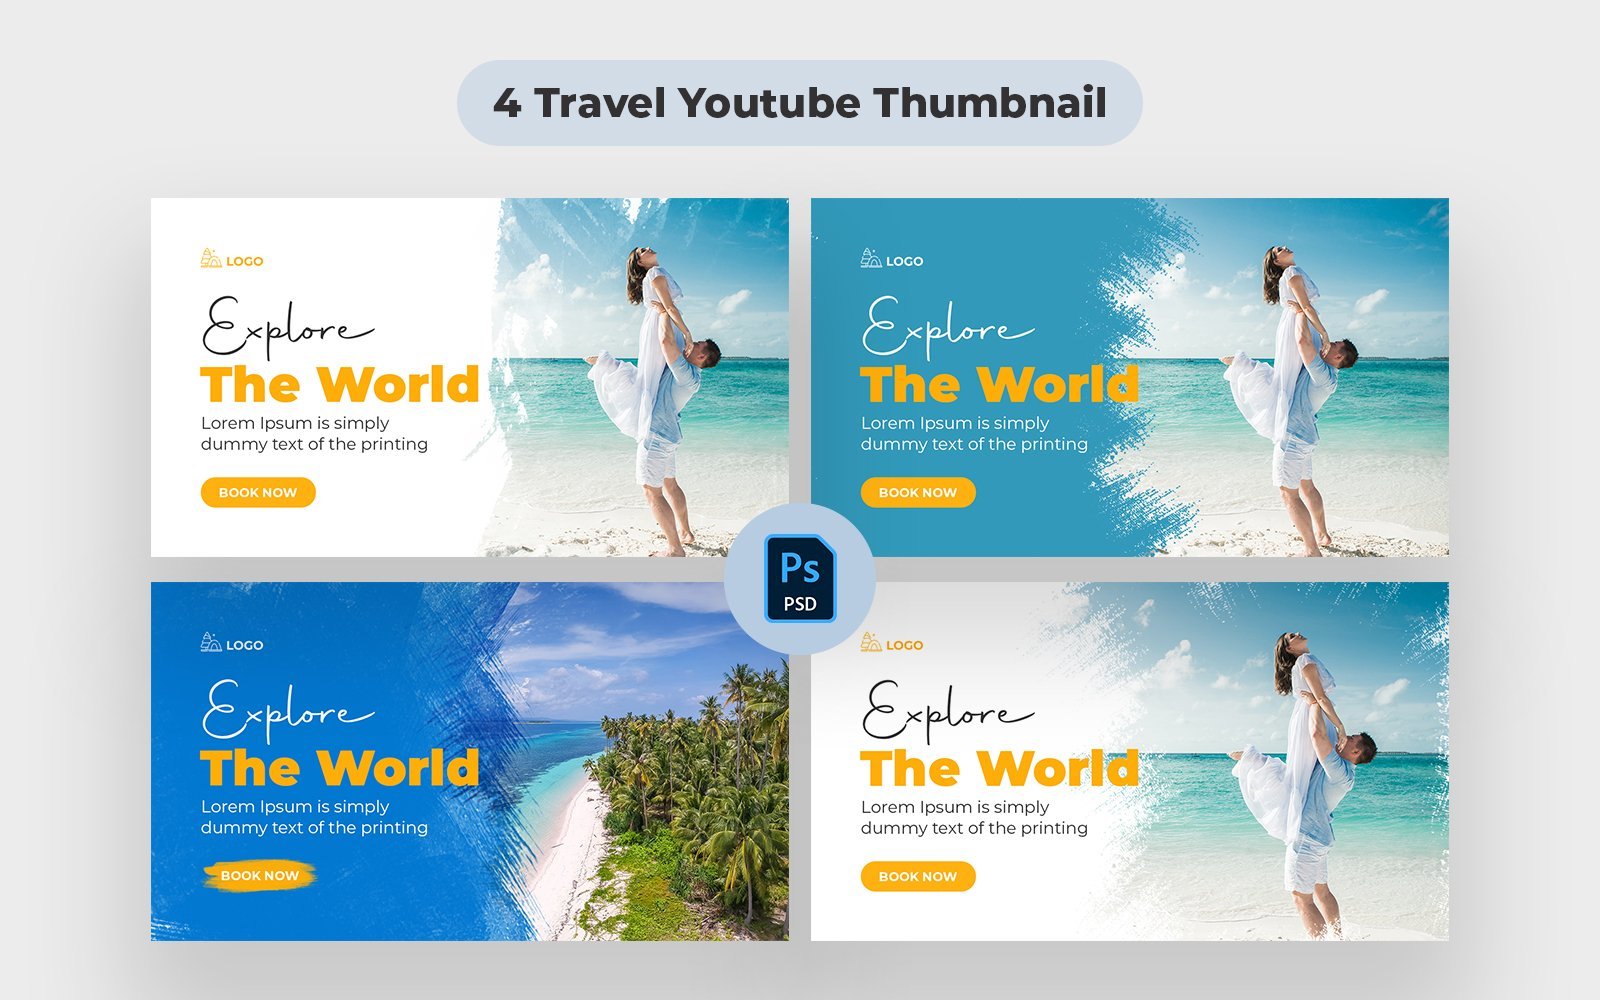 Template #293644 Travel Thumbnail Webdesign Template - Logo template Preview